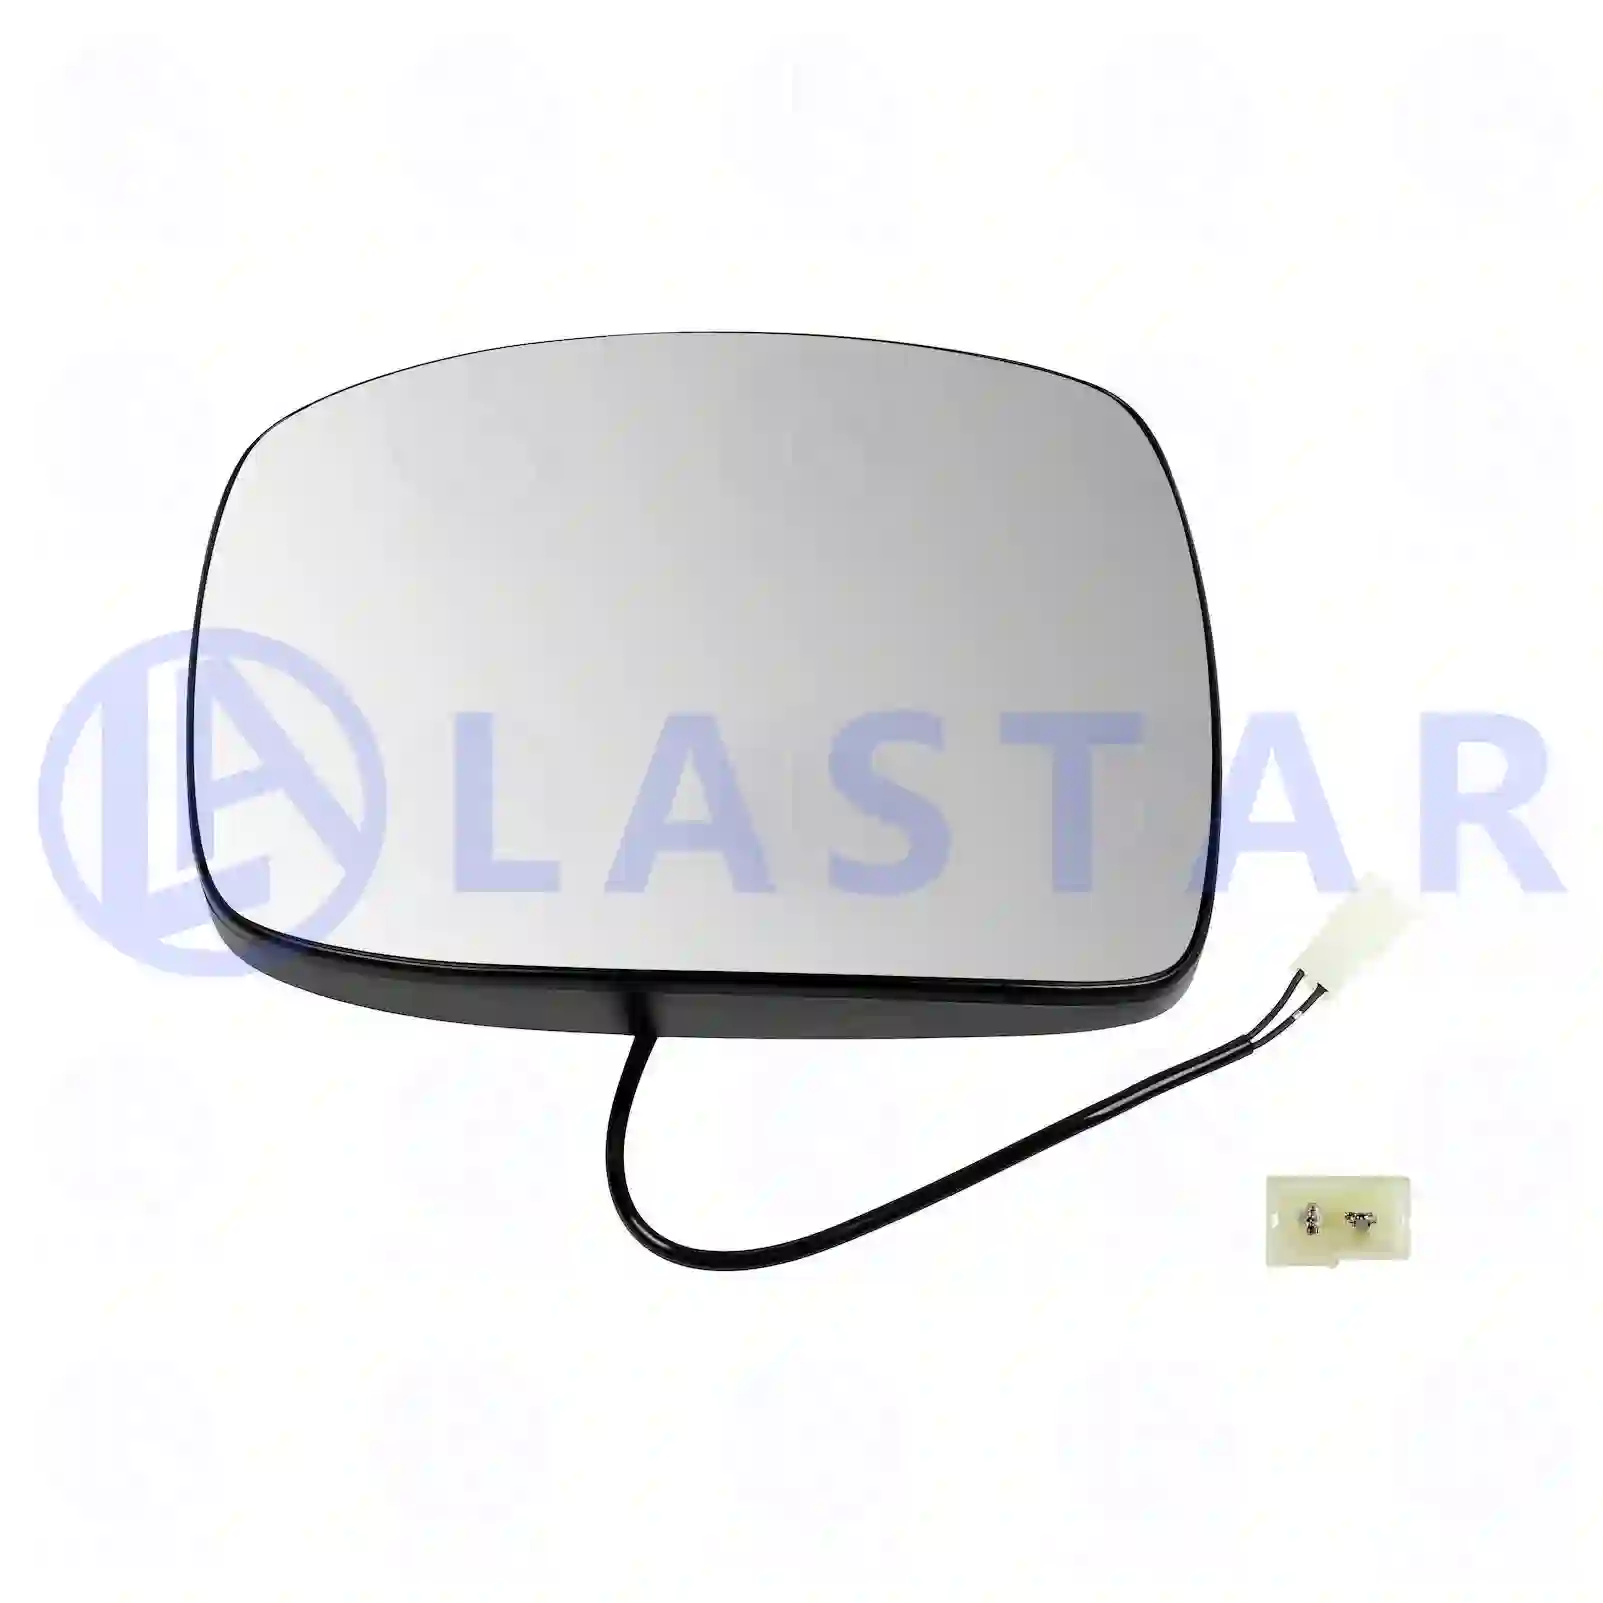 Mirror glass, wide view mirror, heated, 77719973, 1685331, ZG61020-0008 ||  77719973 Lastar Spare Part | Truck Spare Parts, Auotomotive Spare Parts Mirror glass, wide view mirror, heated, 77719973, 1685331, ZG61020-0008 ||  77719973 Lastar Spare Part | Truck Spare Parts, Auotomotive Spare Parts